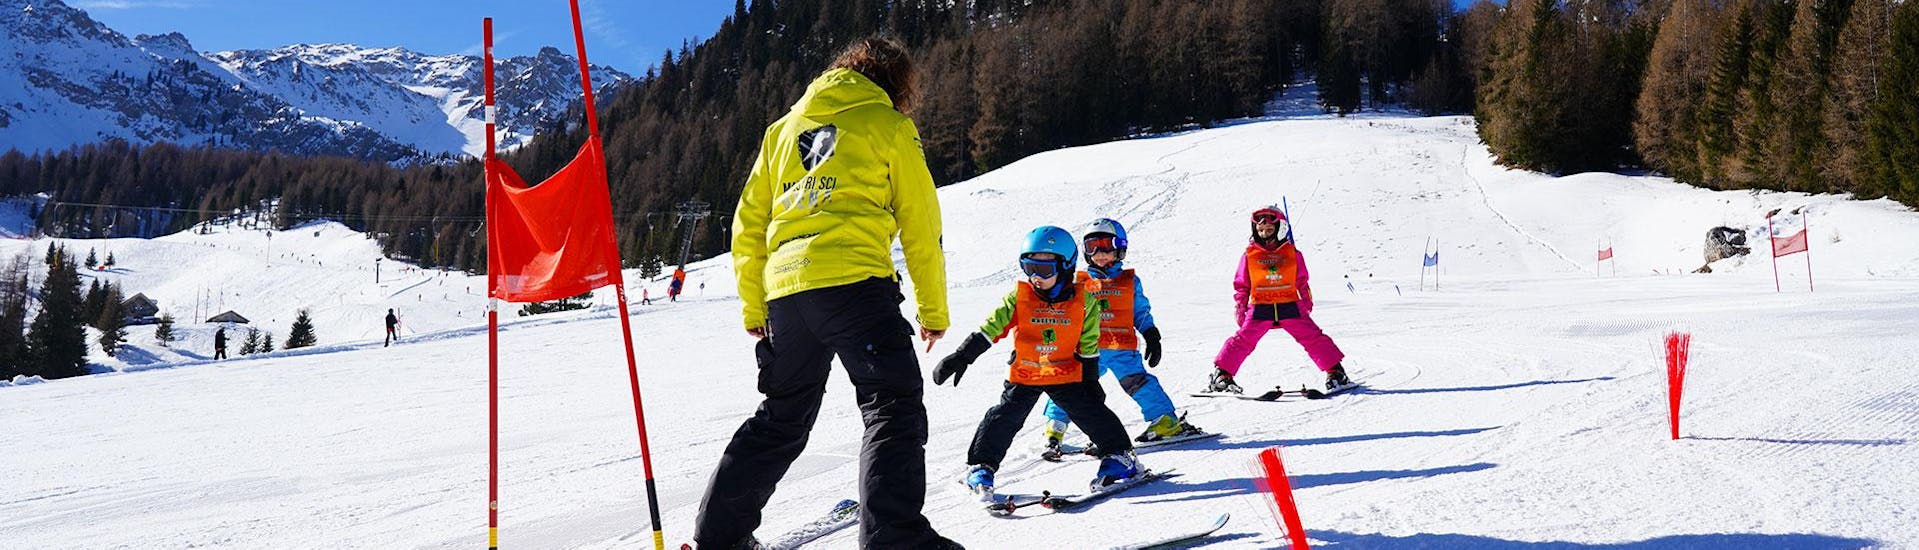 Kids Ski Lessons for Experienced Skiers (4-14 y.).